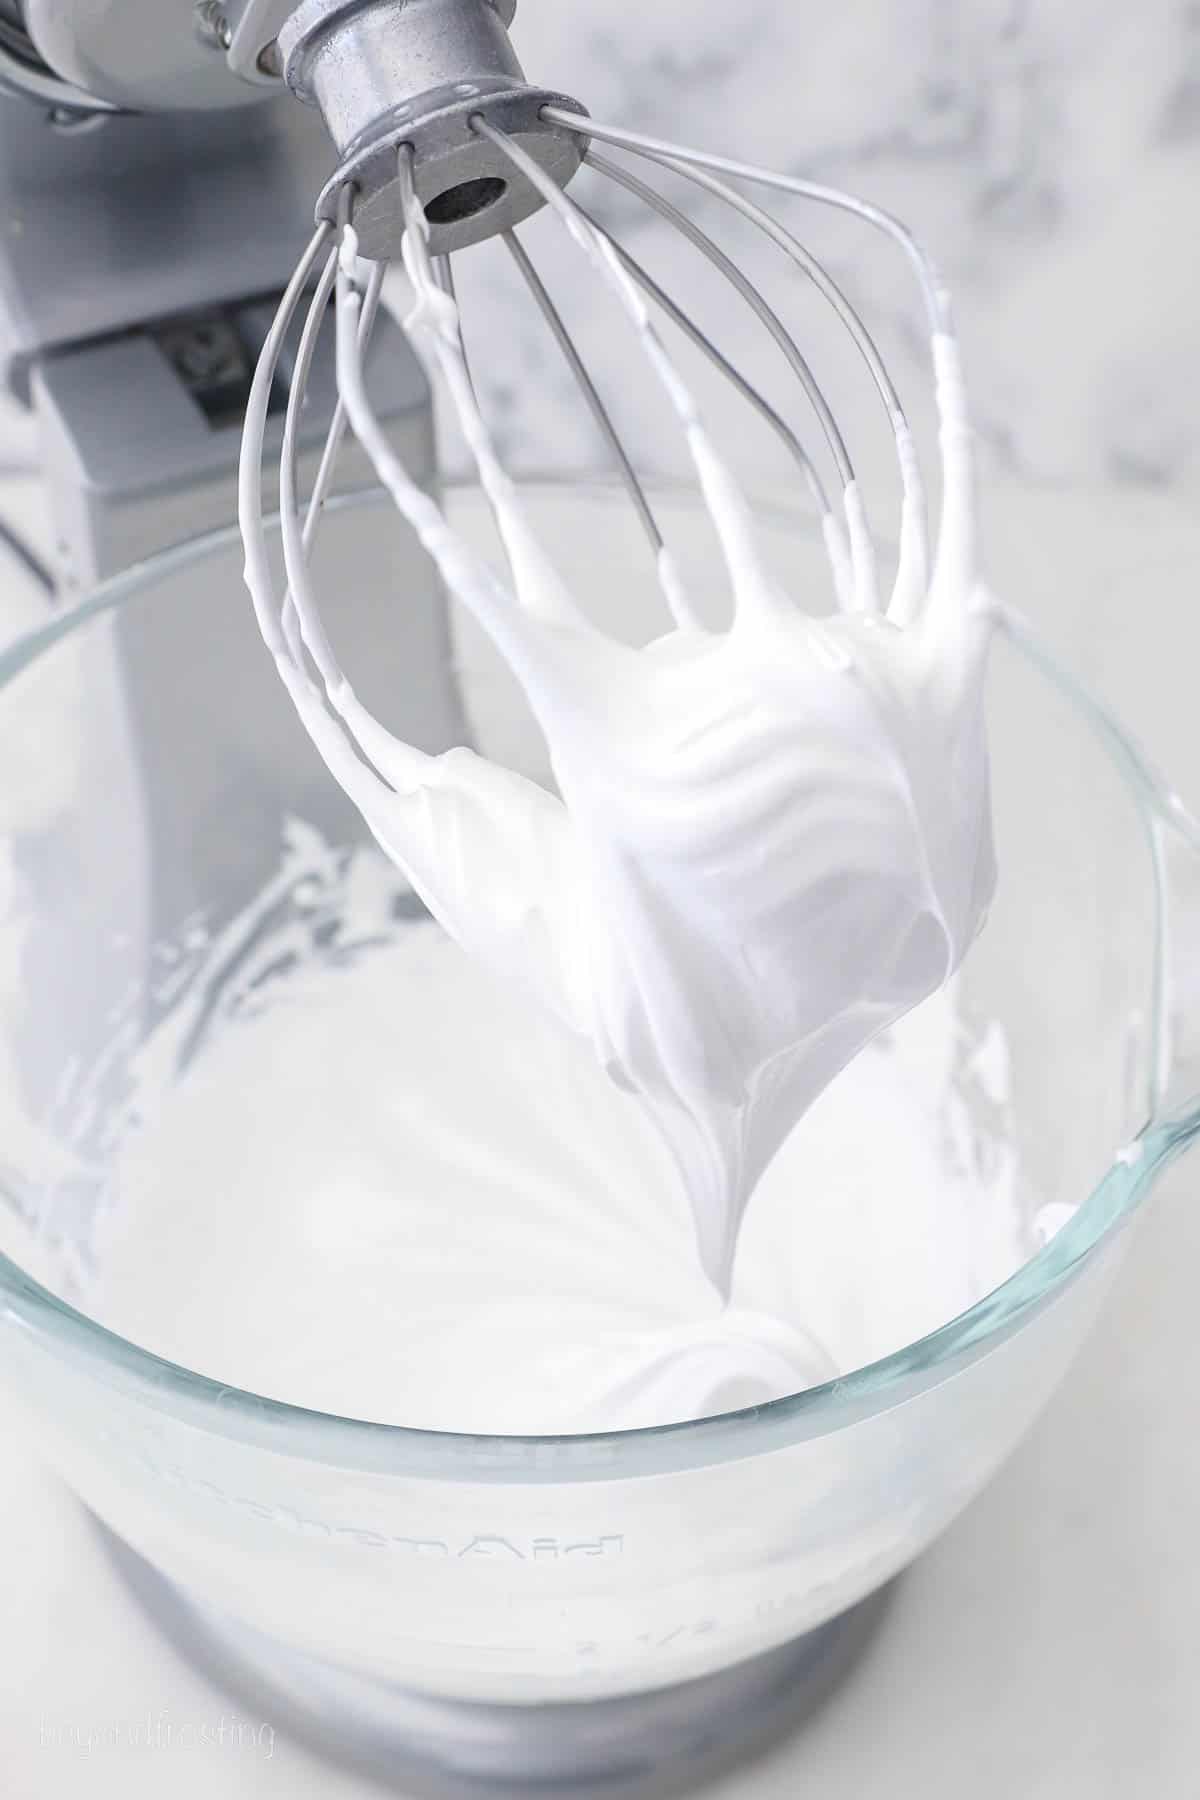 A mixing bowl with marshmallow frosting beneath the whisk attachment of a stand mixer.